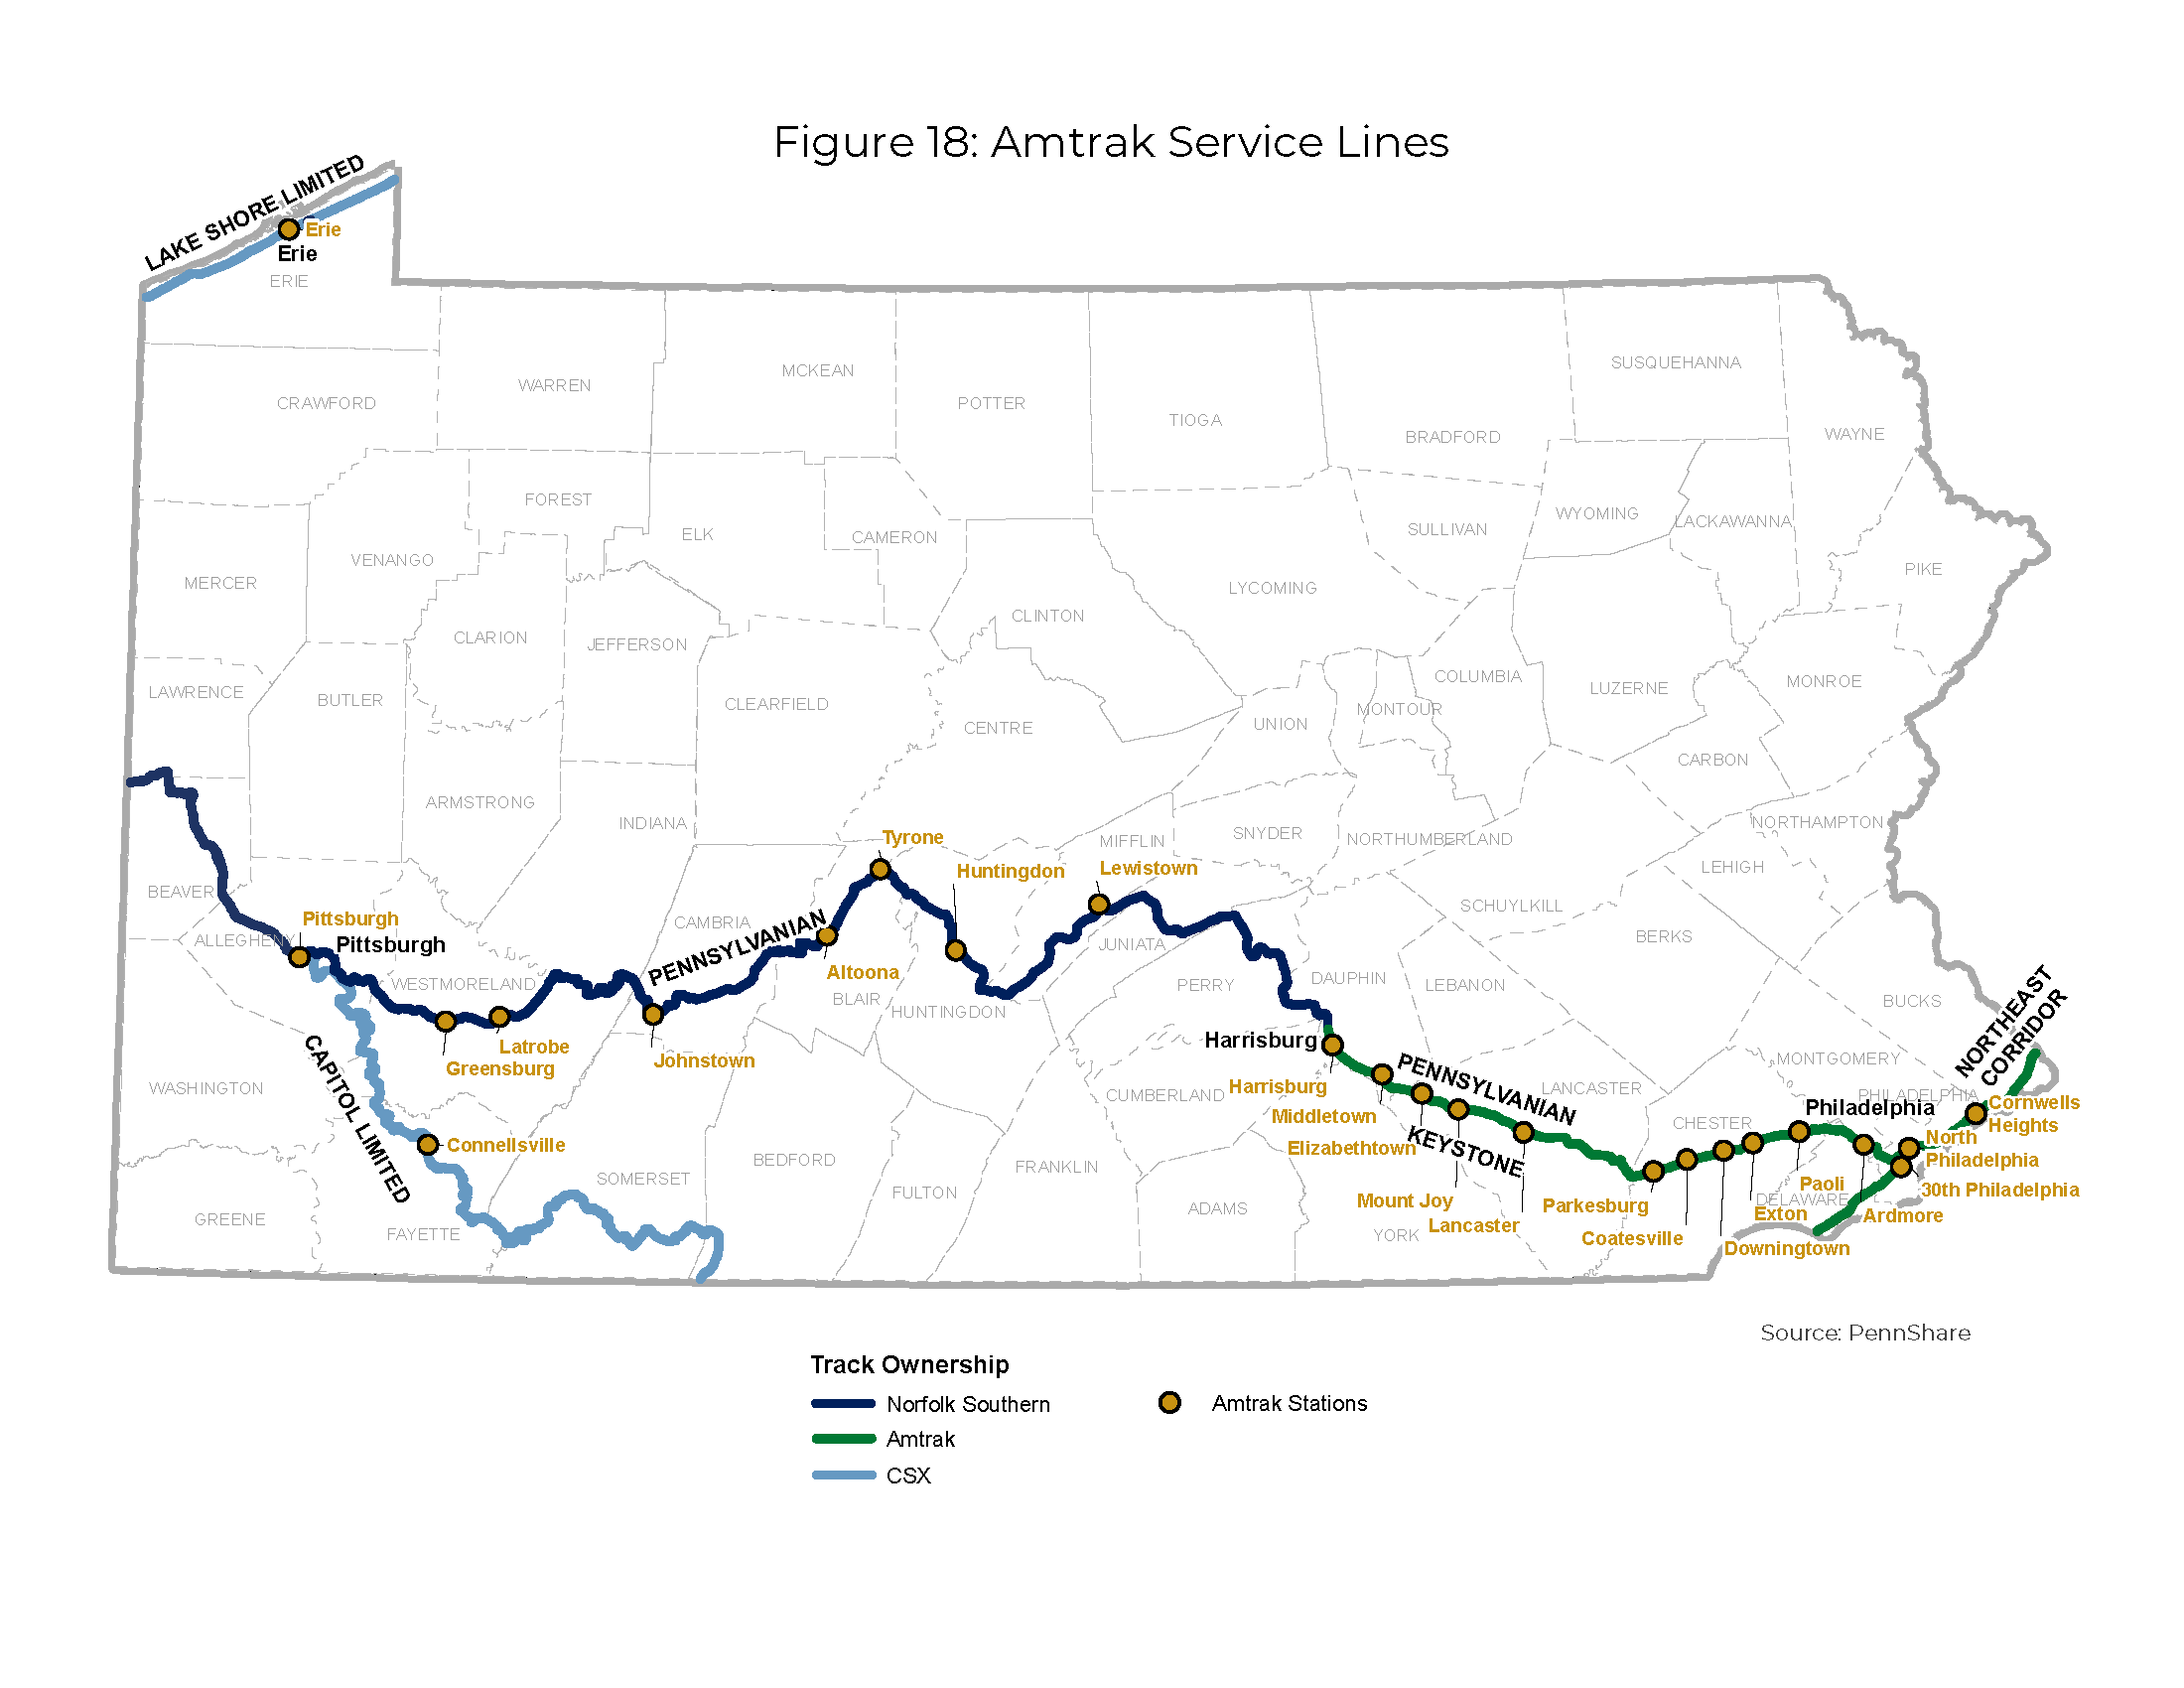 Figure 18 is PennShare's Pennsylvania state map illustrating Amtrack Service Lines and track ownership by Norfolk Southern, Amtrak, and CSX. In addition, the map includes the locations of Amtrak Stations.